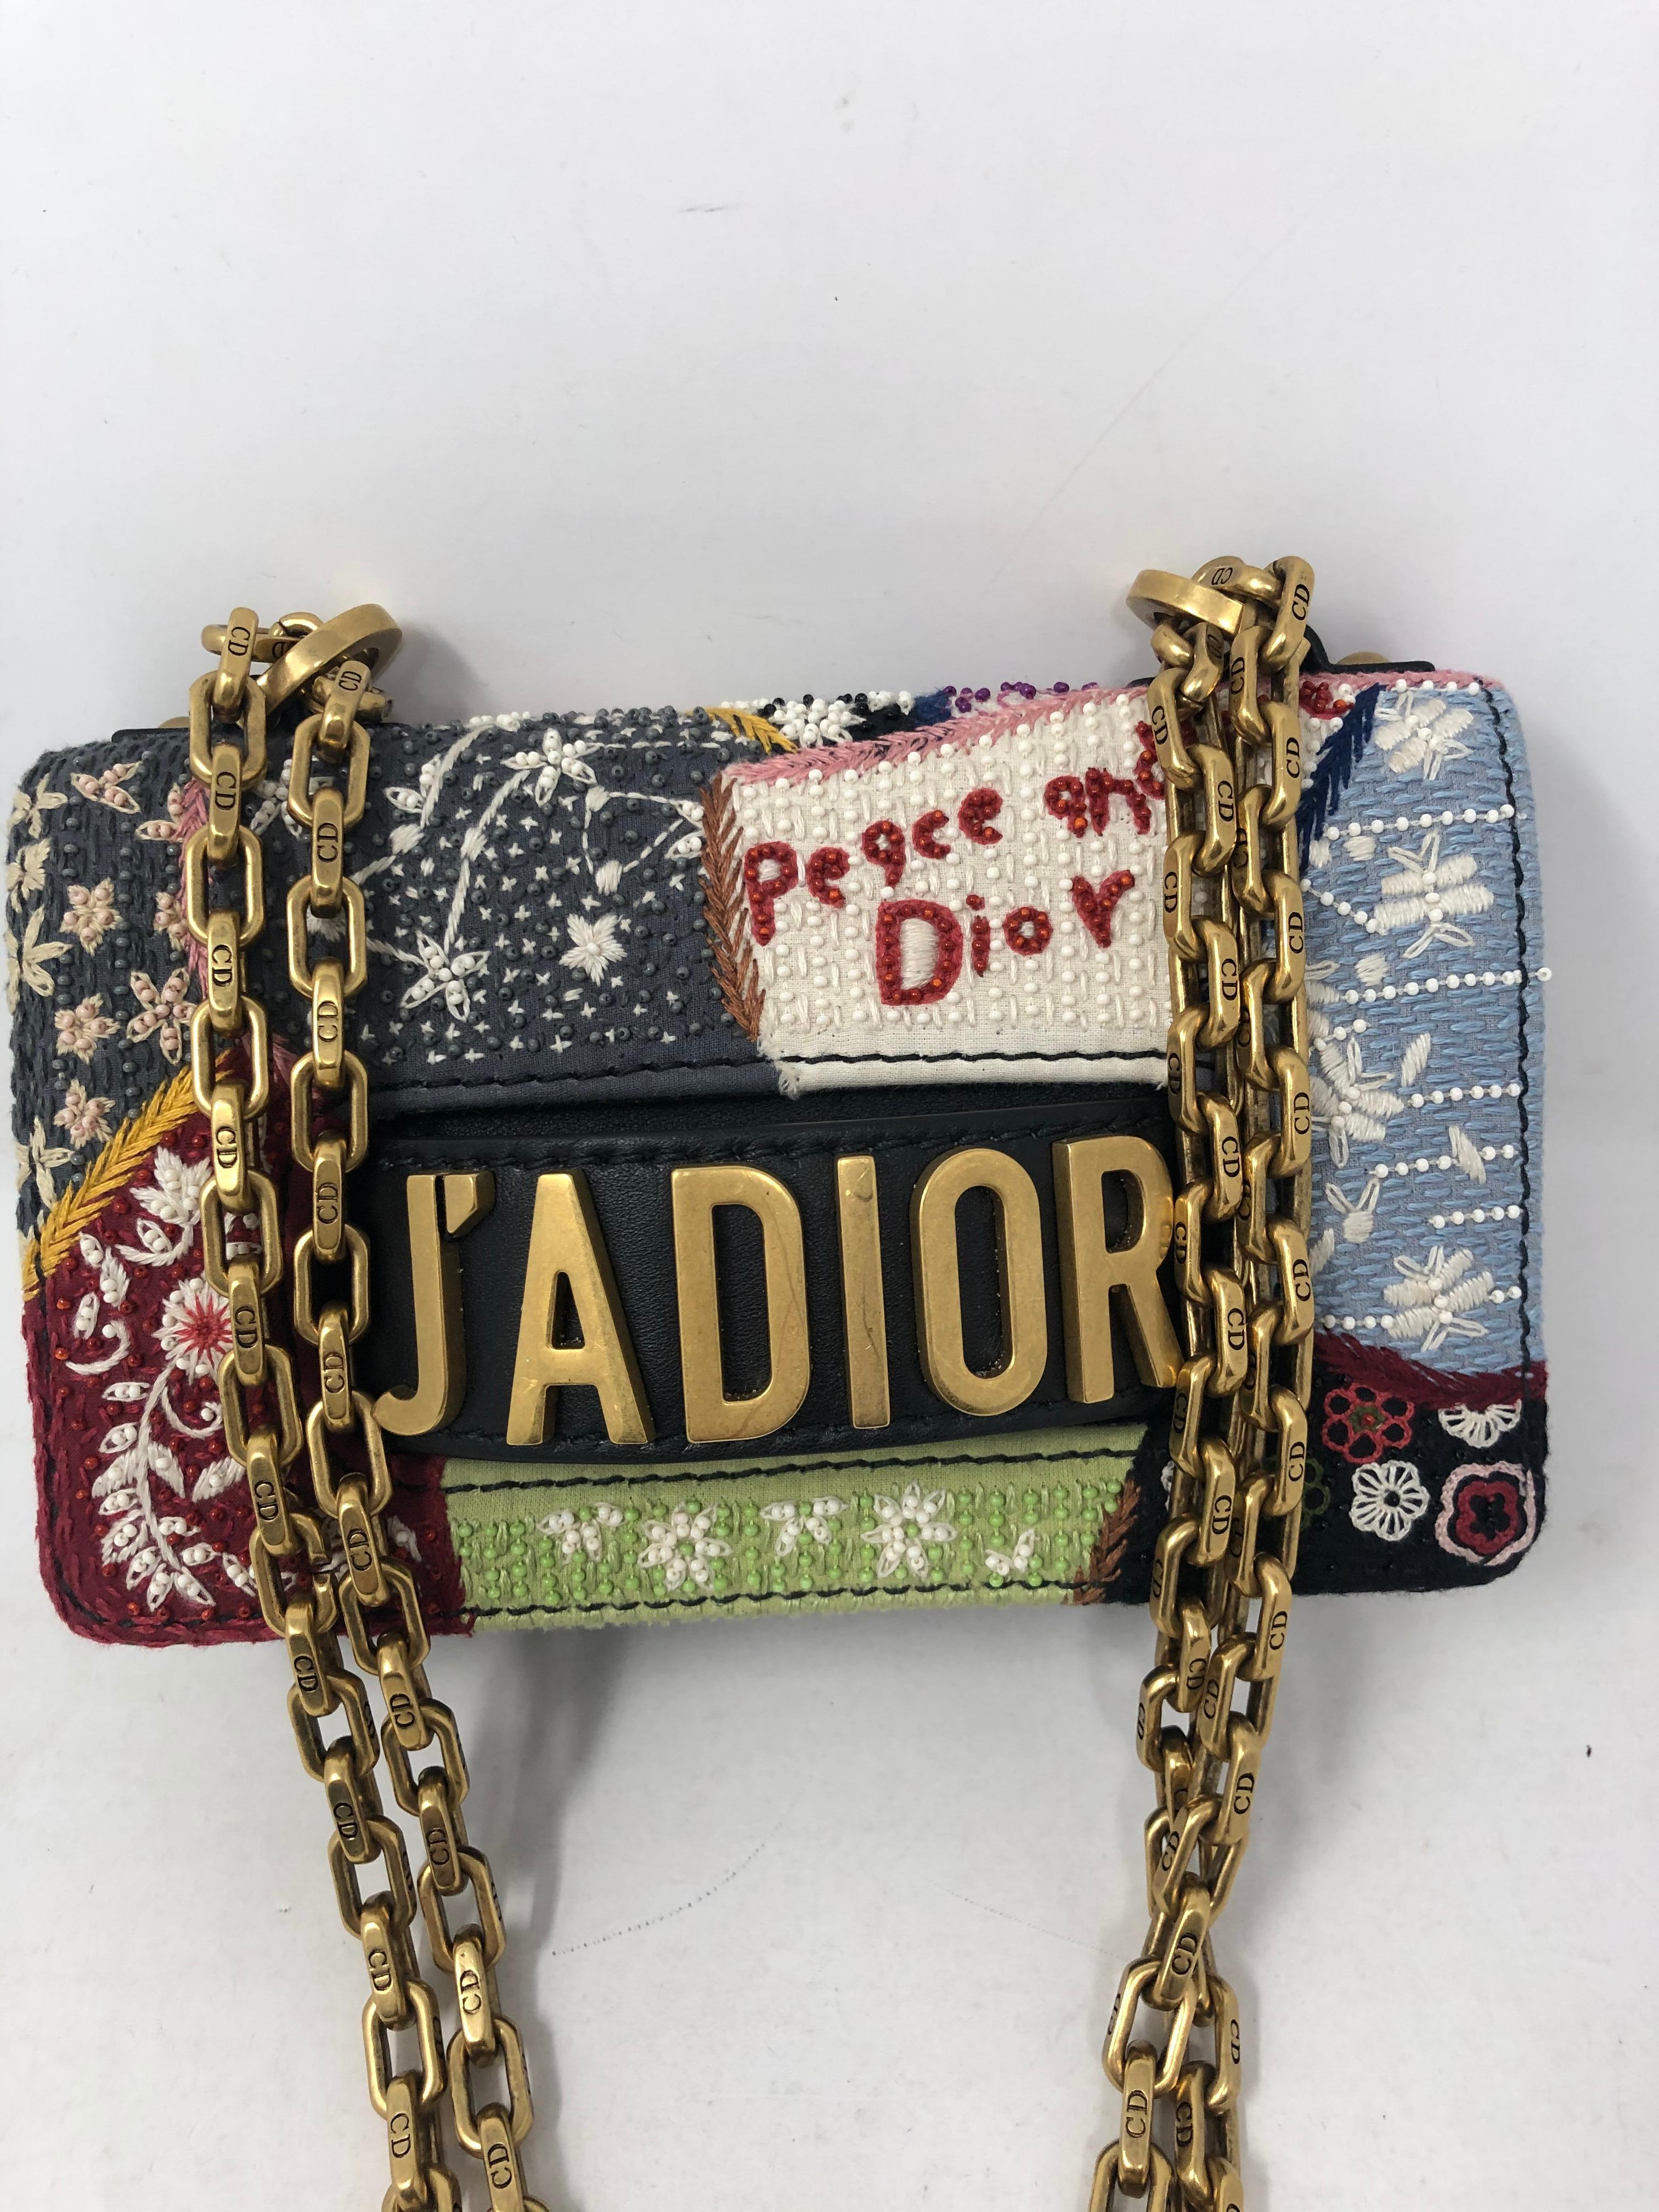 J'adior Peace and Dior Mini Crossbody Bag. Beaded and handstitched beautiful bag. Rare and Collector's piece. Never worn. Brand new condition. Don't miss out. Guaranteed authentic. 